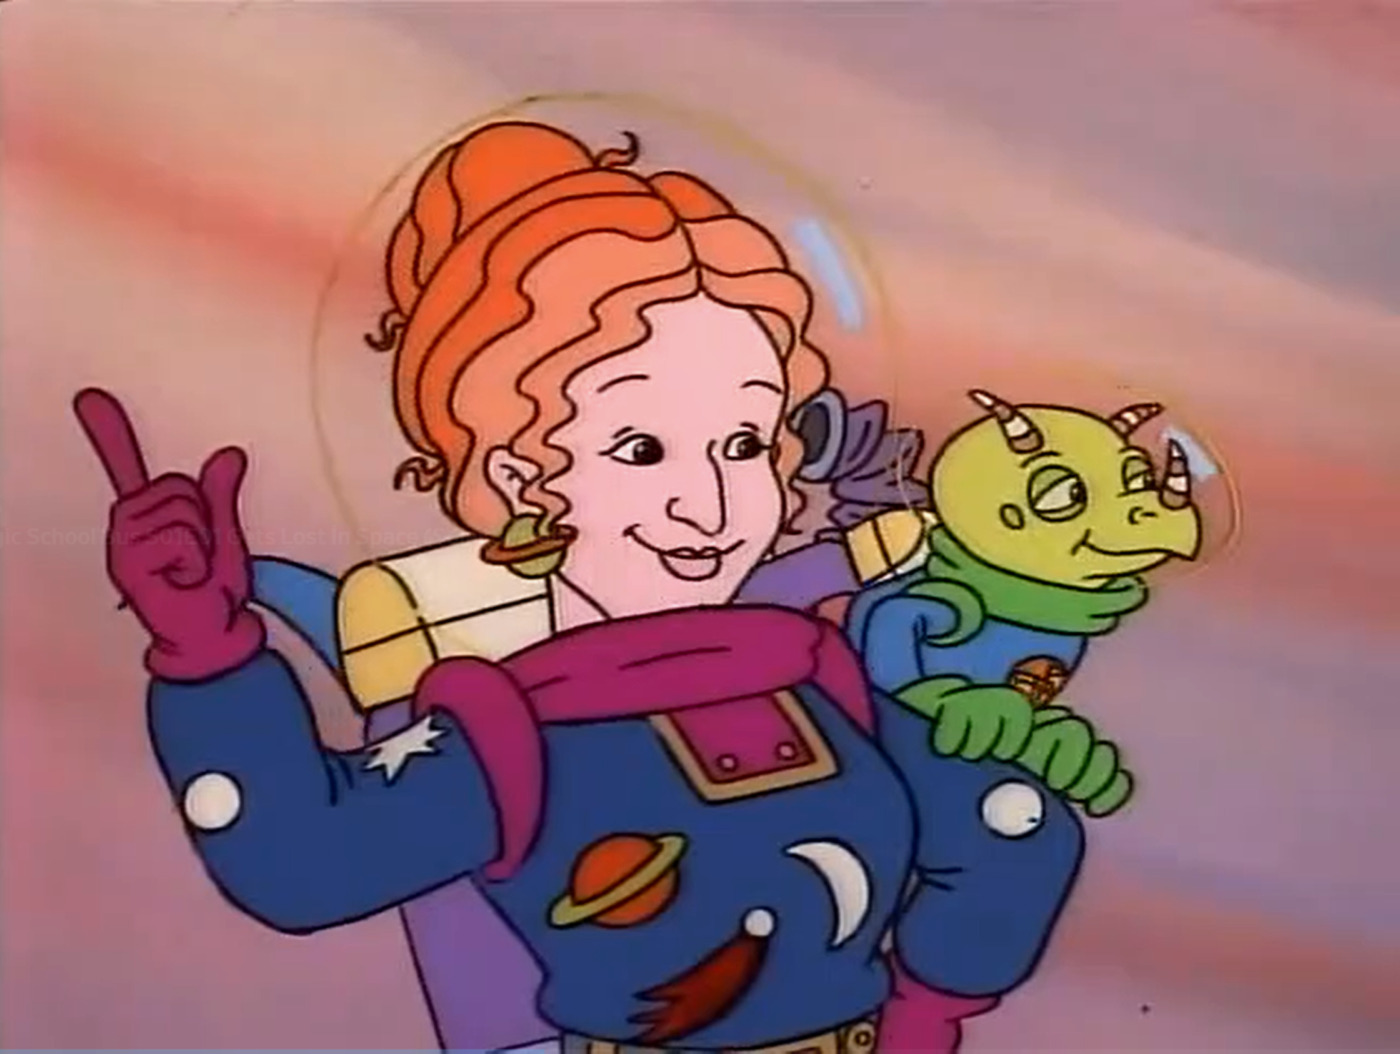 The Magic School Bus's Ms. Frizzle in a space suit with chameleon class pet, Liz.